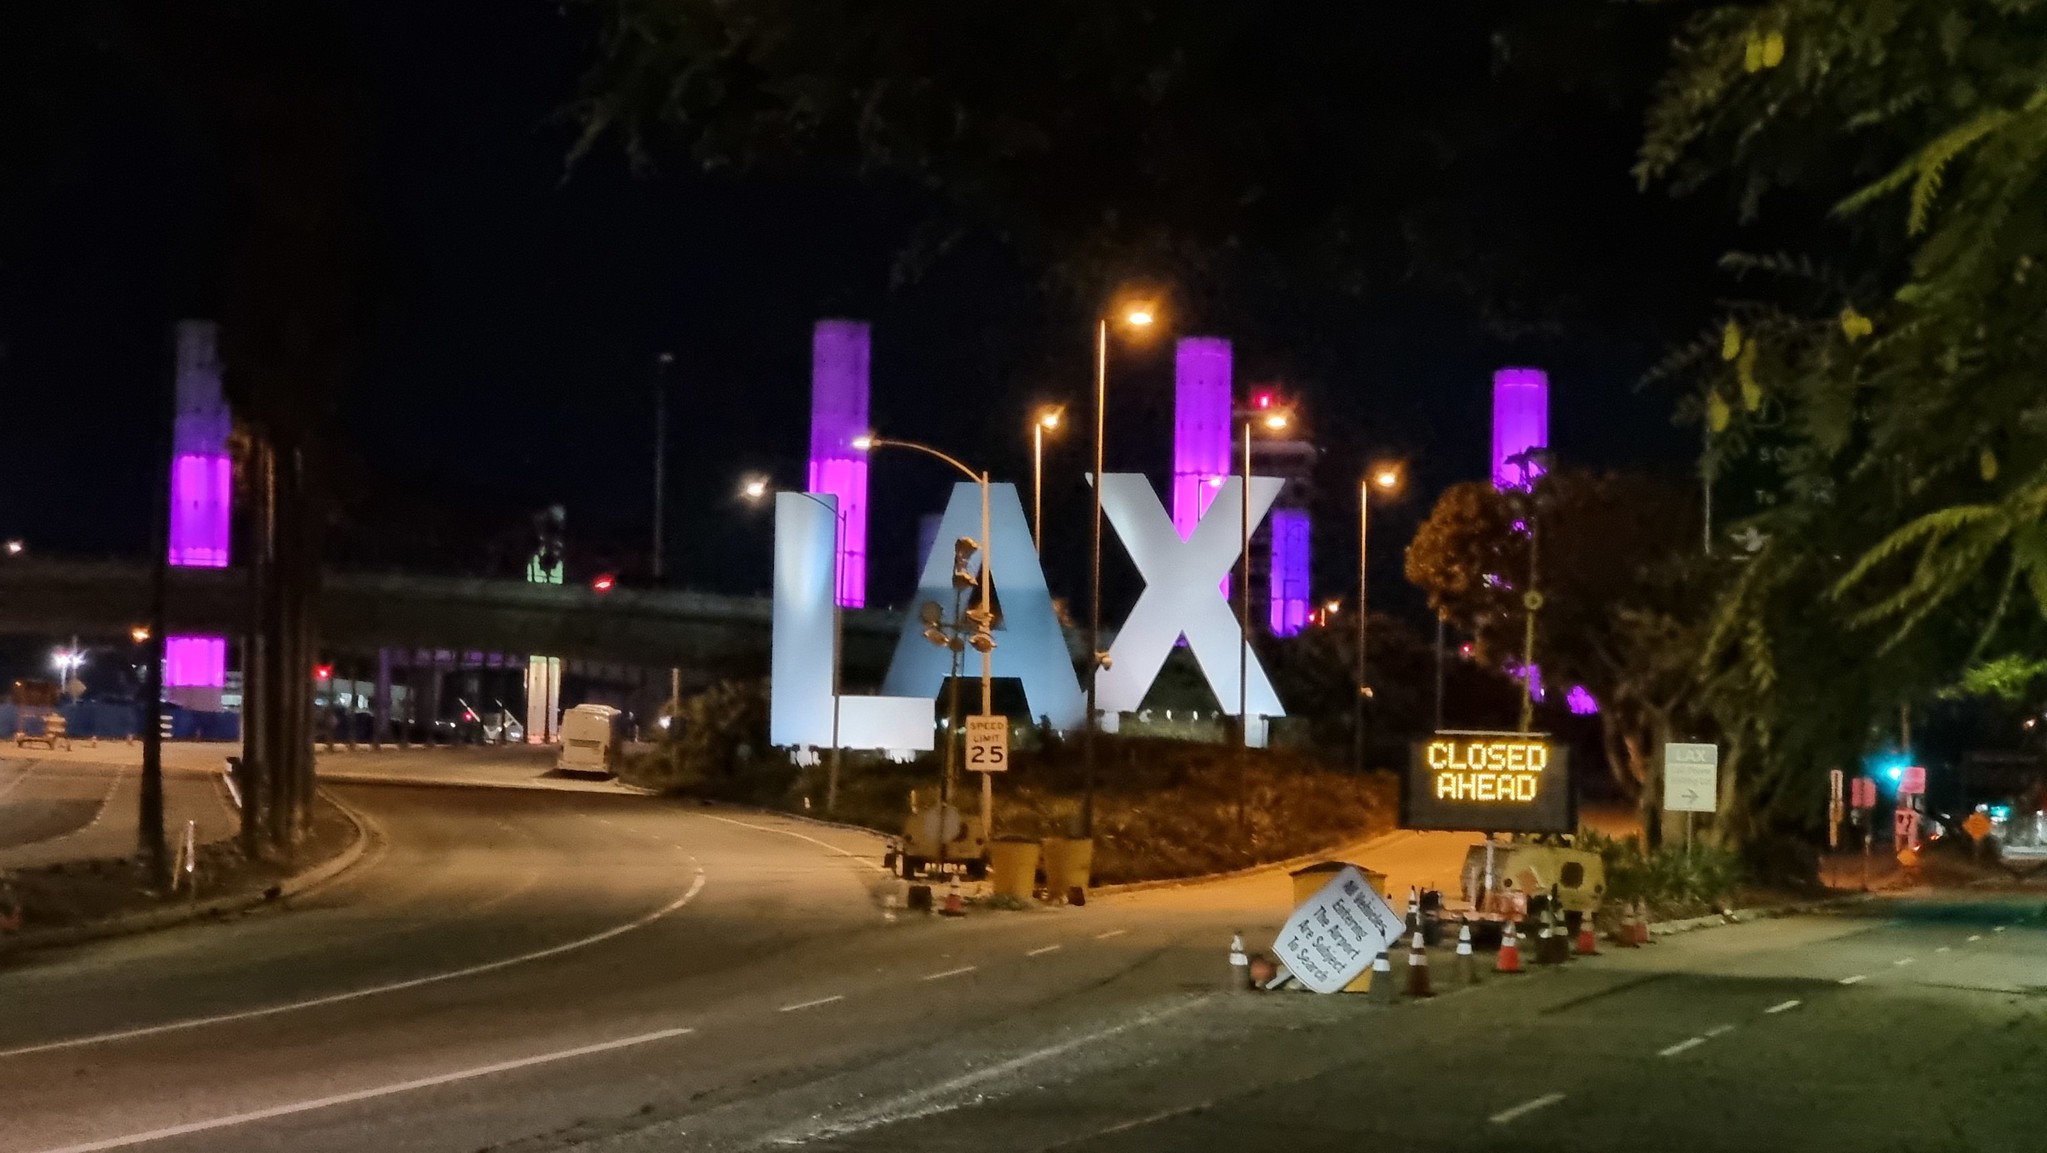 The famous LAX sign at Los Angeles airport